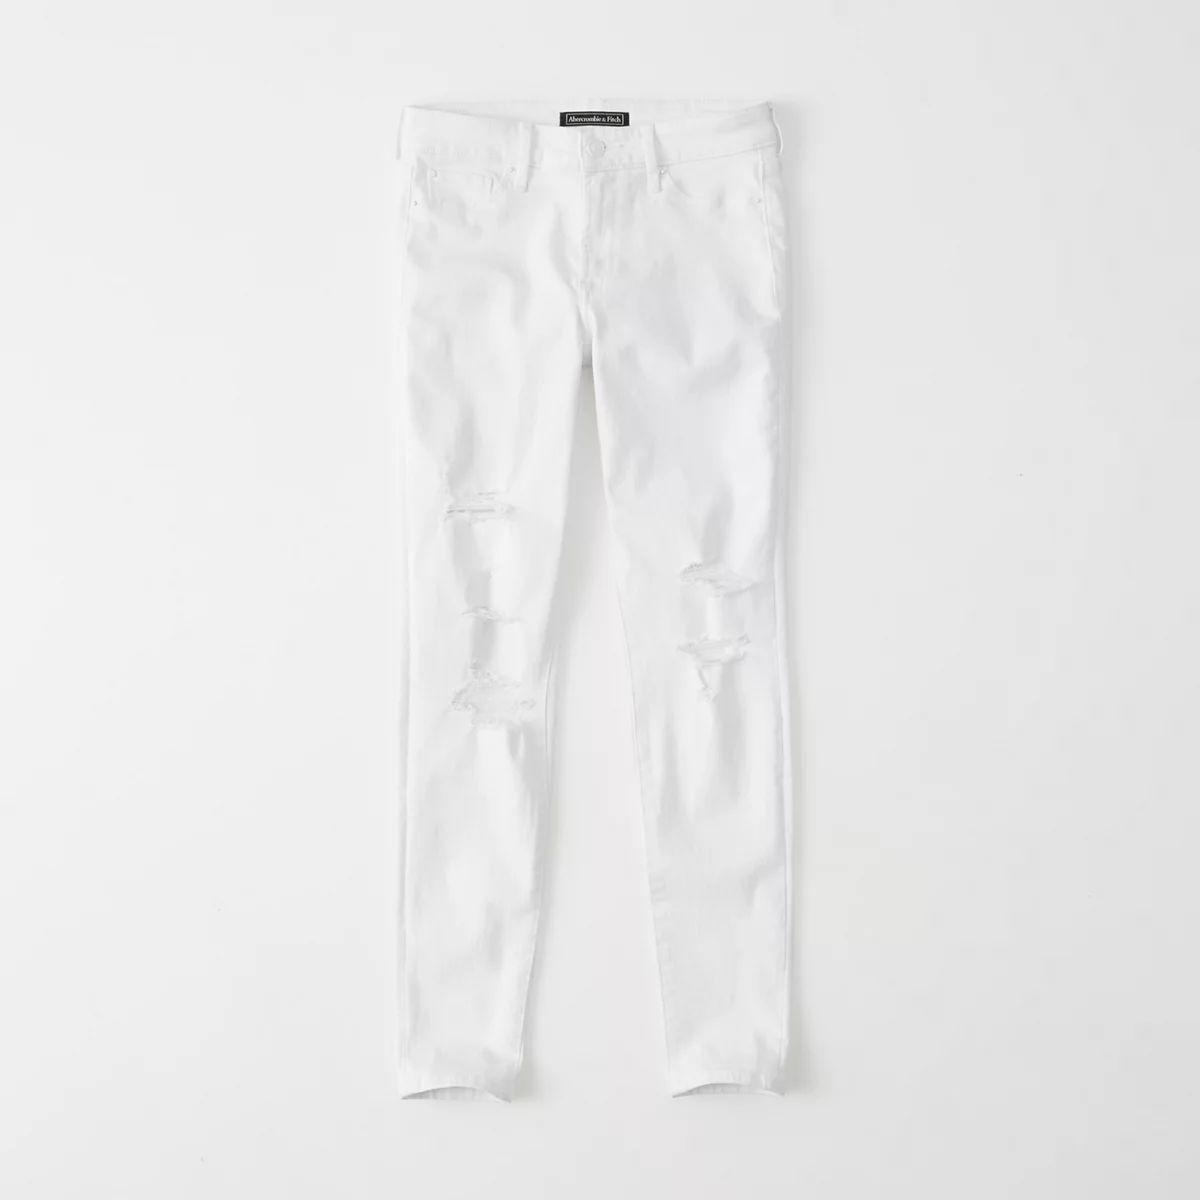 Ripped Super Skinny Jeans | Abercrombie & Fitch US & UK